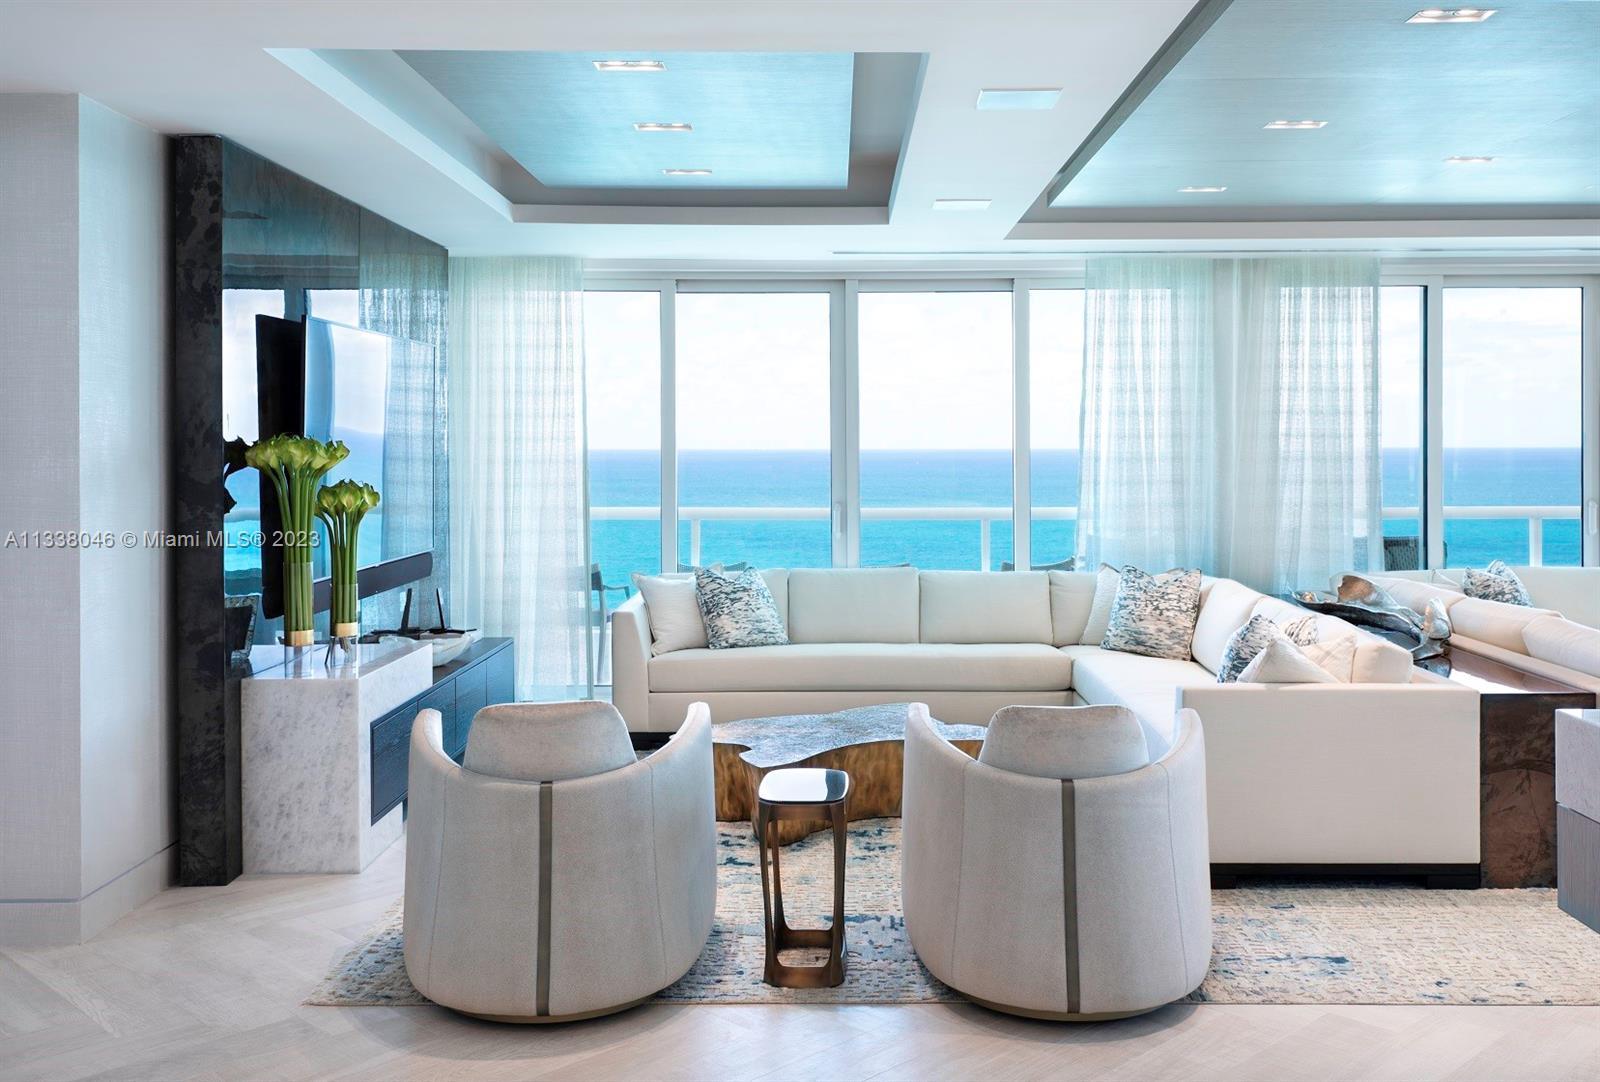 Presenting units 17E-17F at The Palace, a full-service, luxury condo in a prime Bal Harbour location